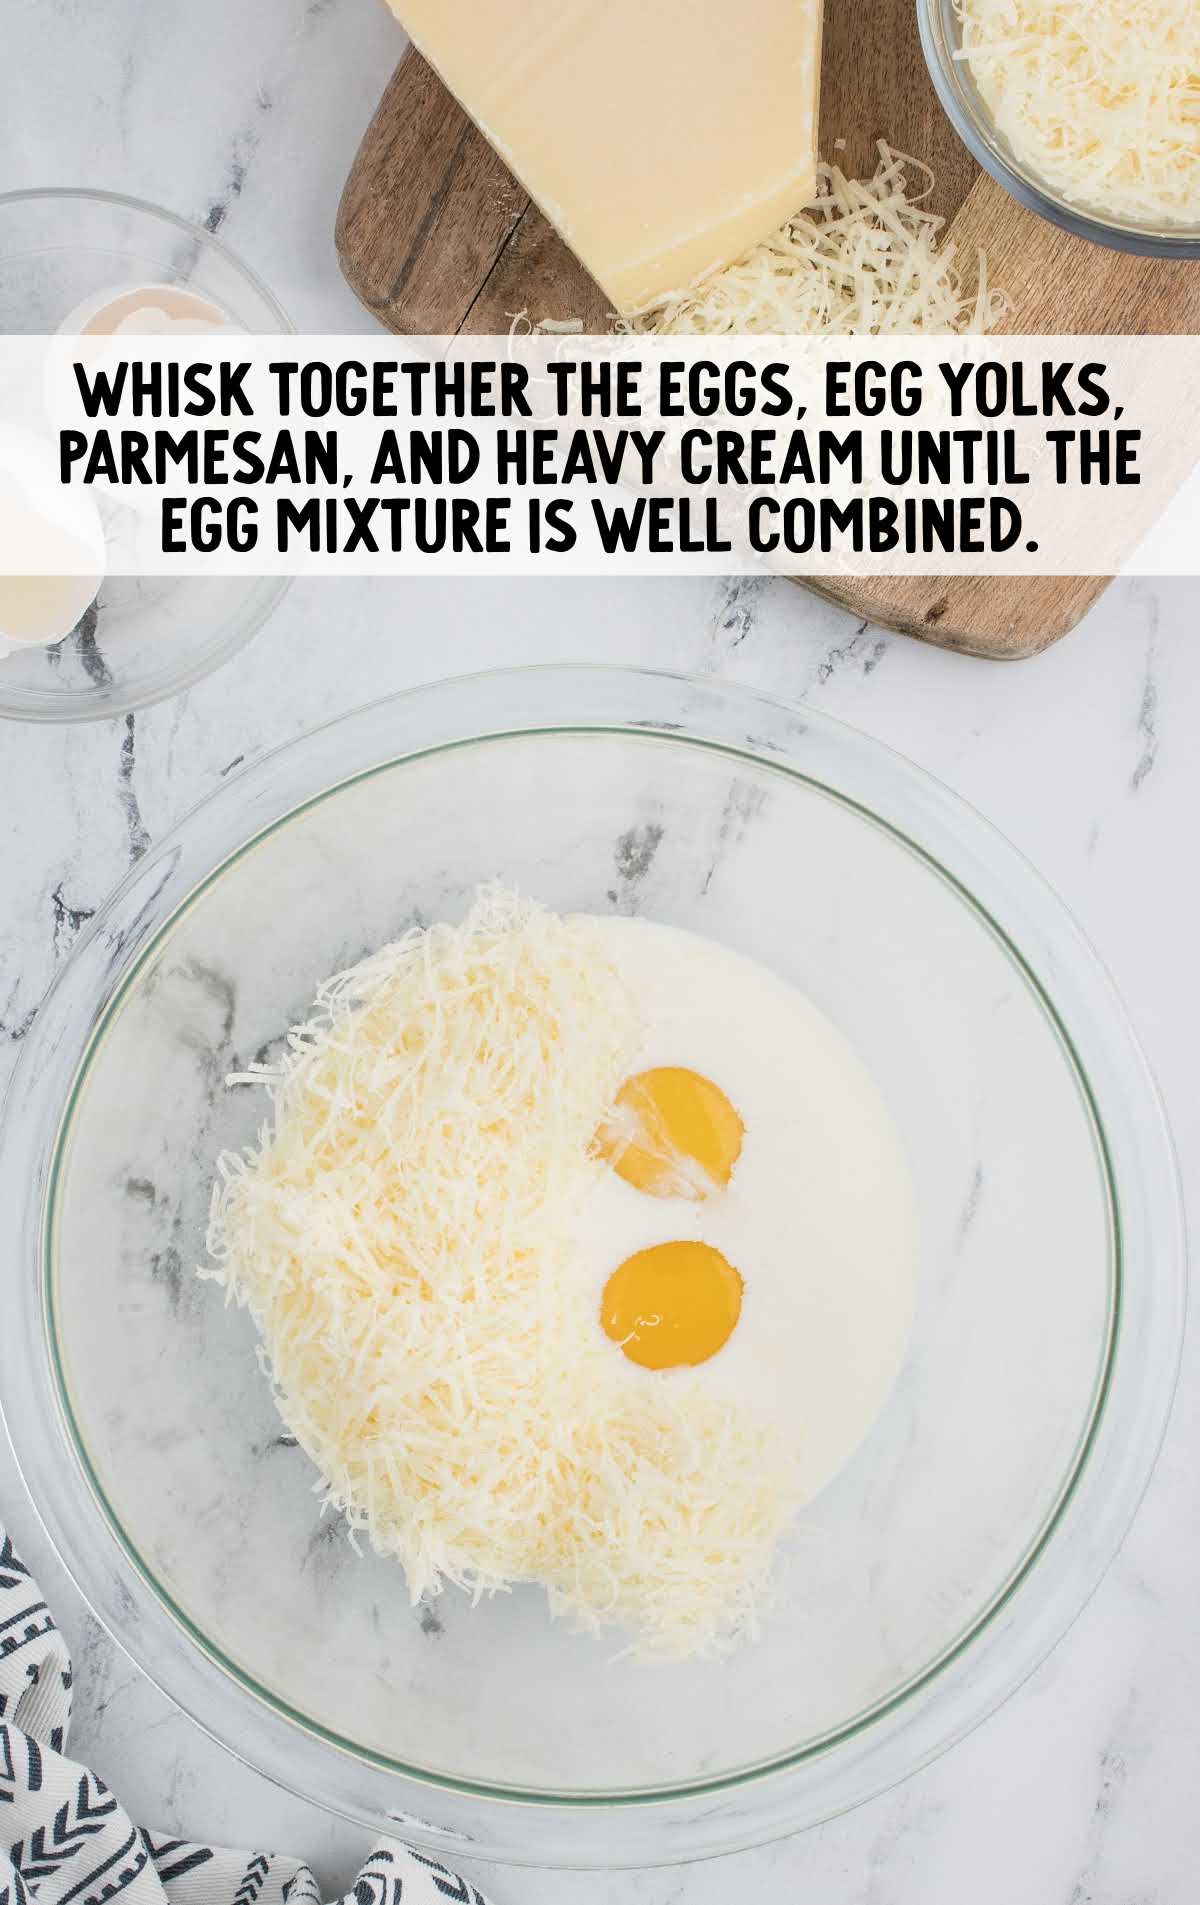 eggs, egg yolk, parmesan, and heavy cream whisked together